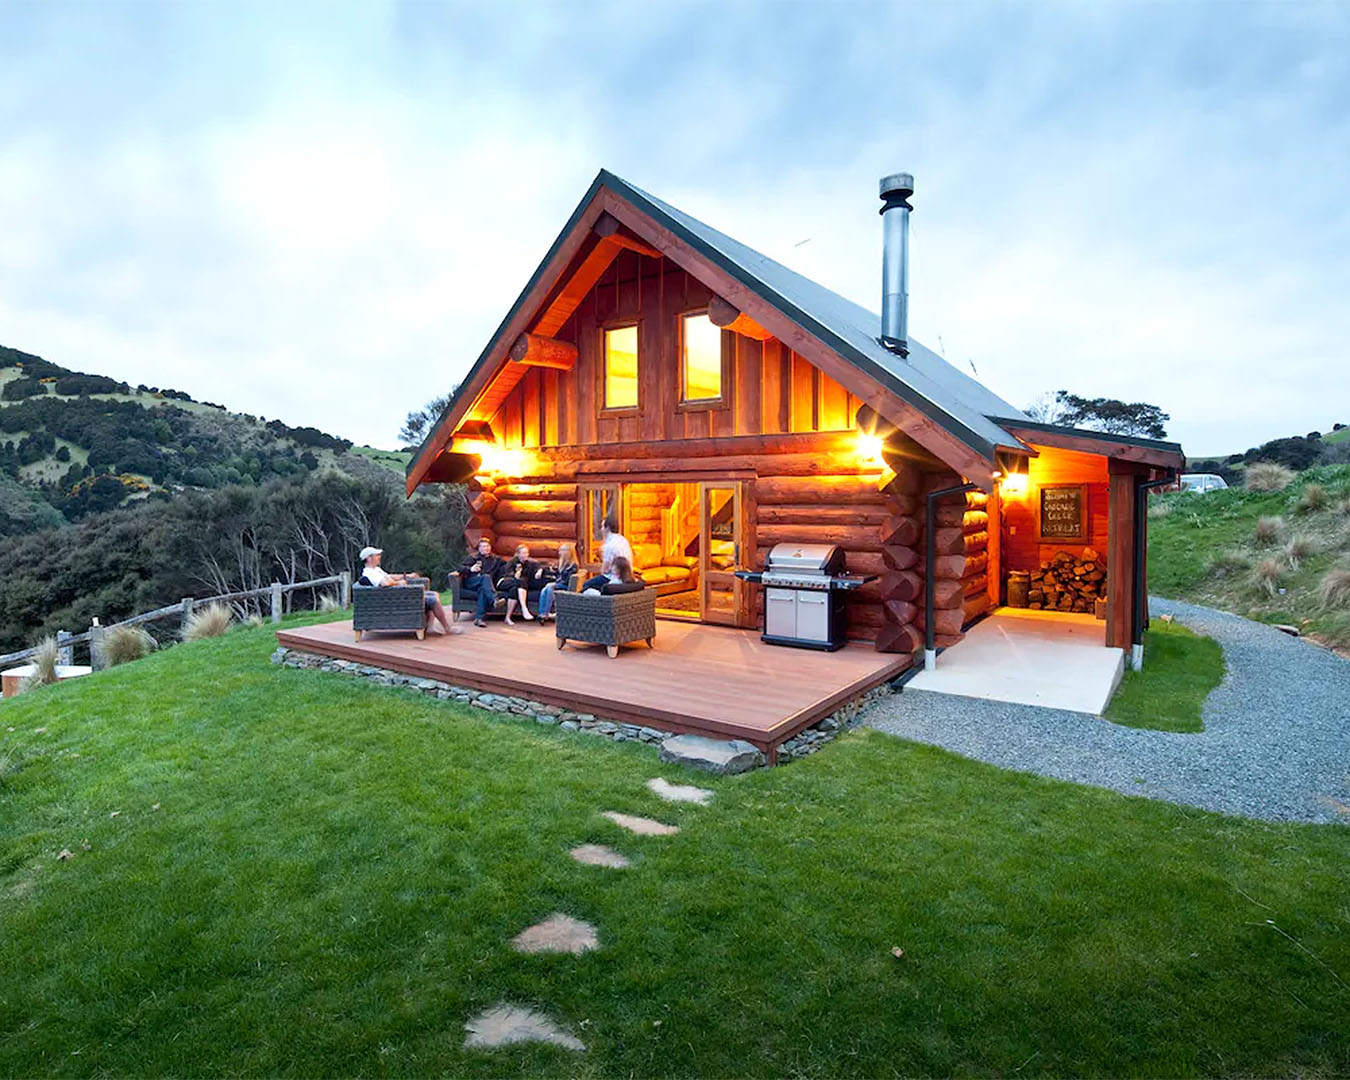 Cascade Creek Retreat is seen from the outside with people relaxing on the deck.